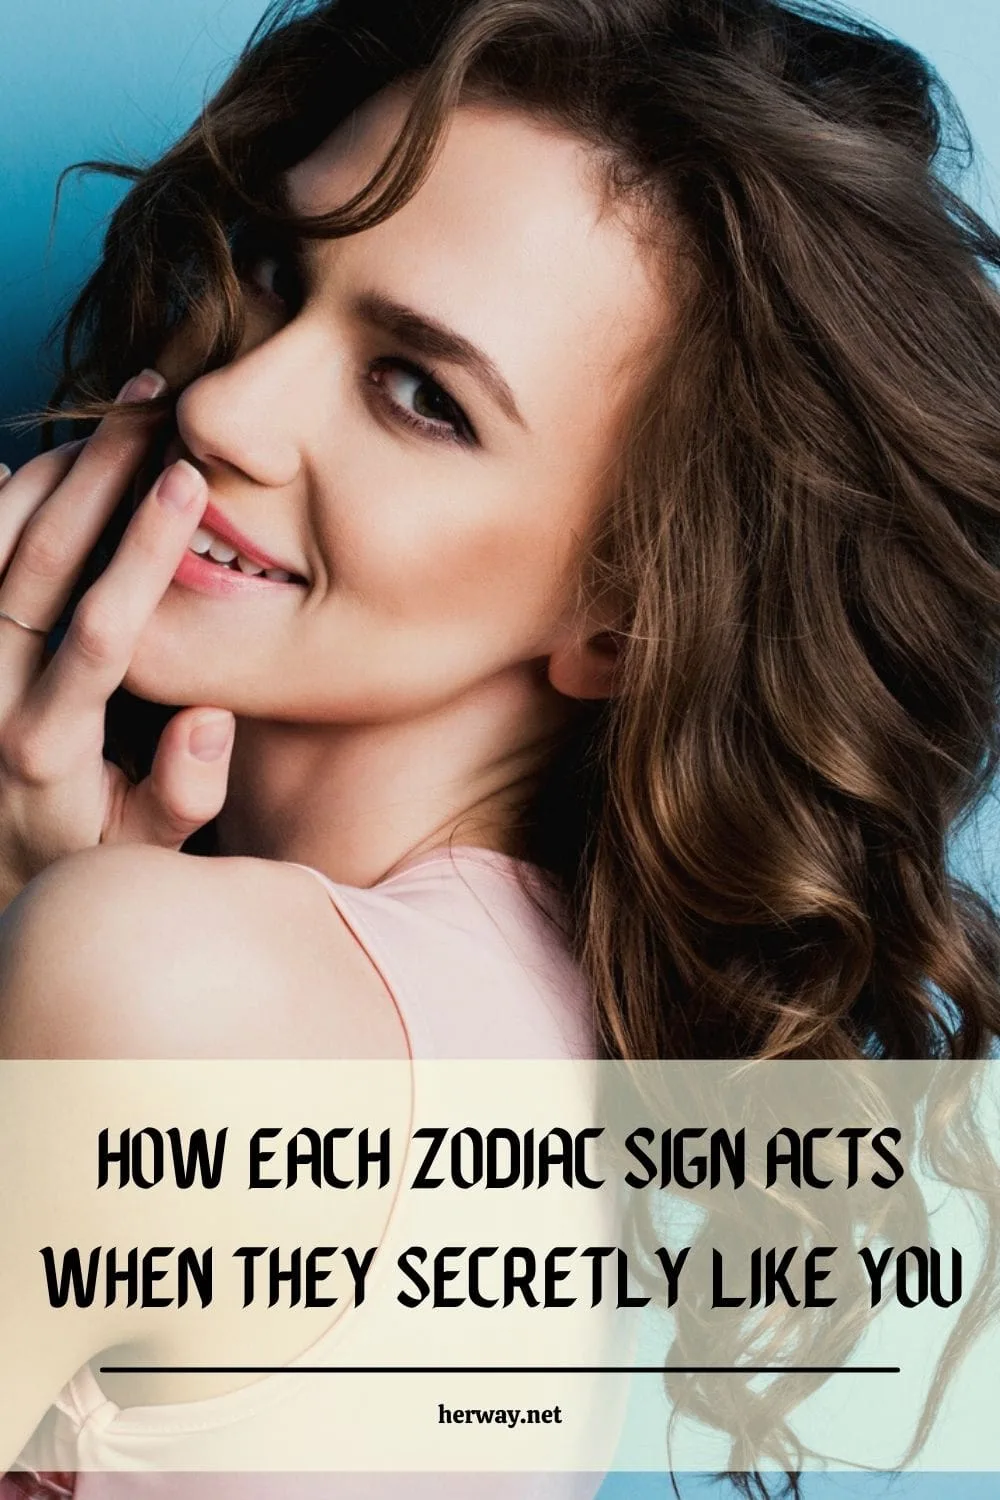 How Each Zodiac Sign Acts When They Secretly Like You